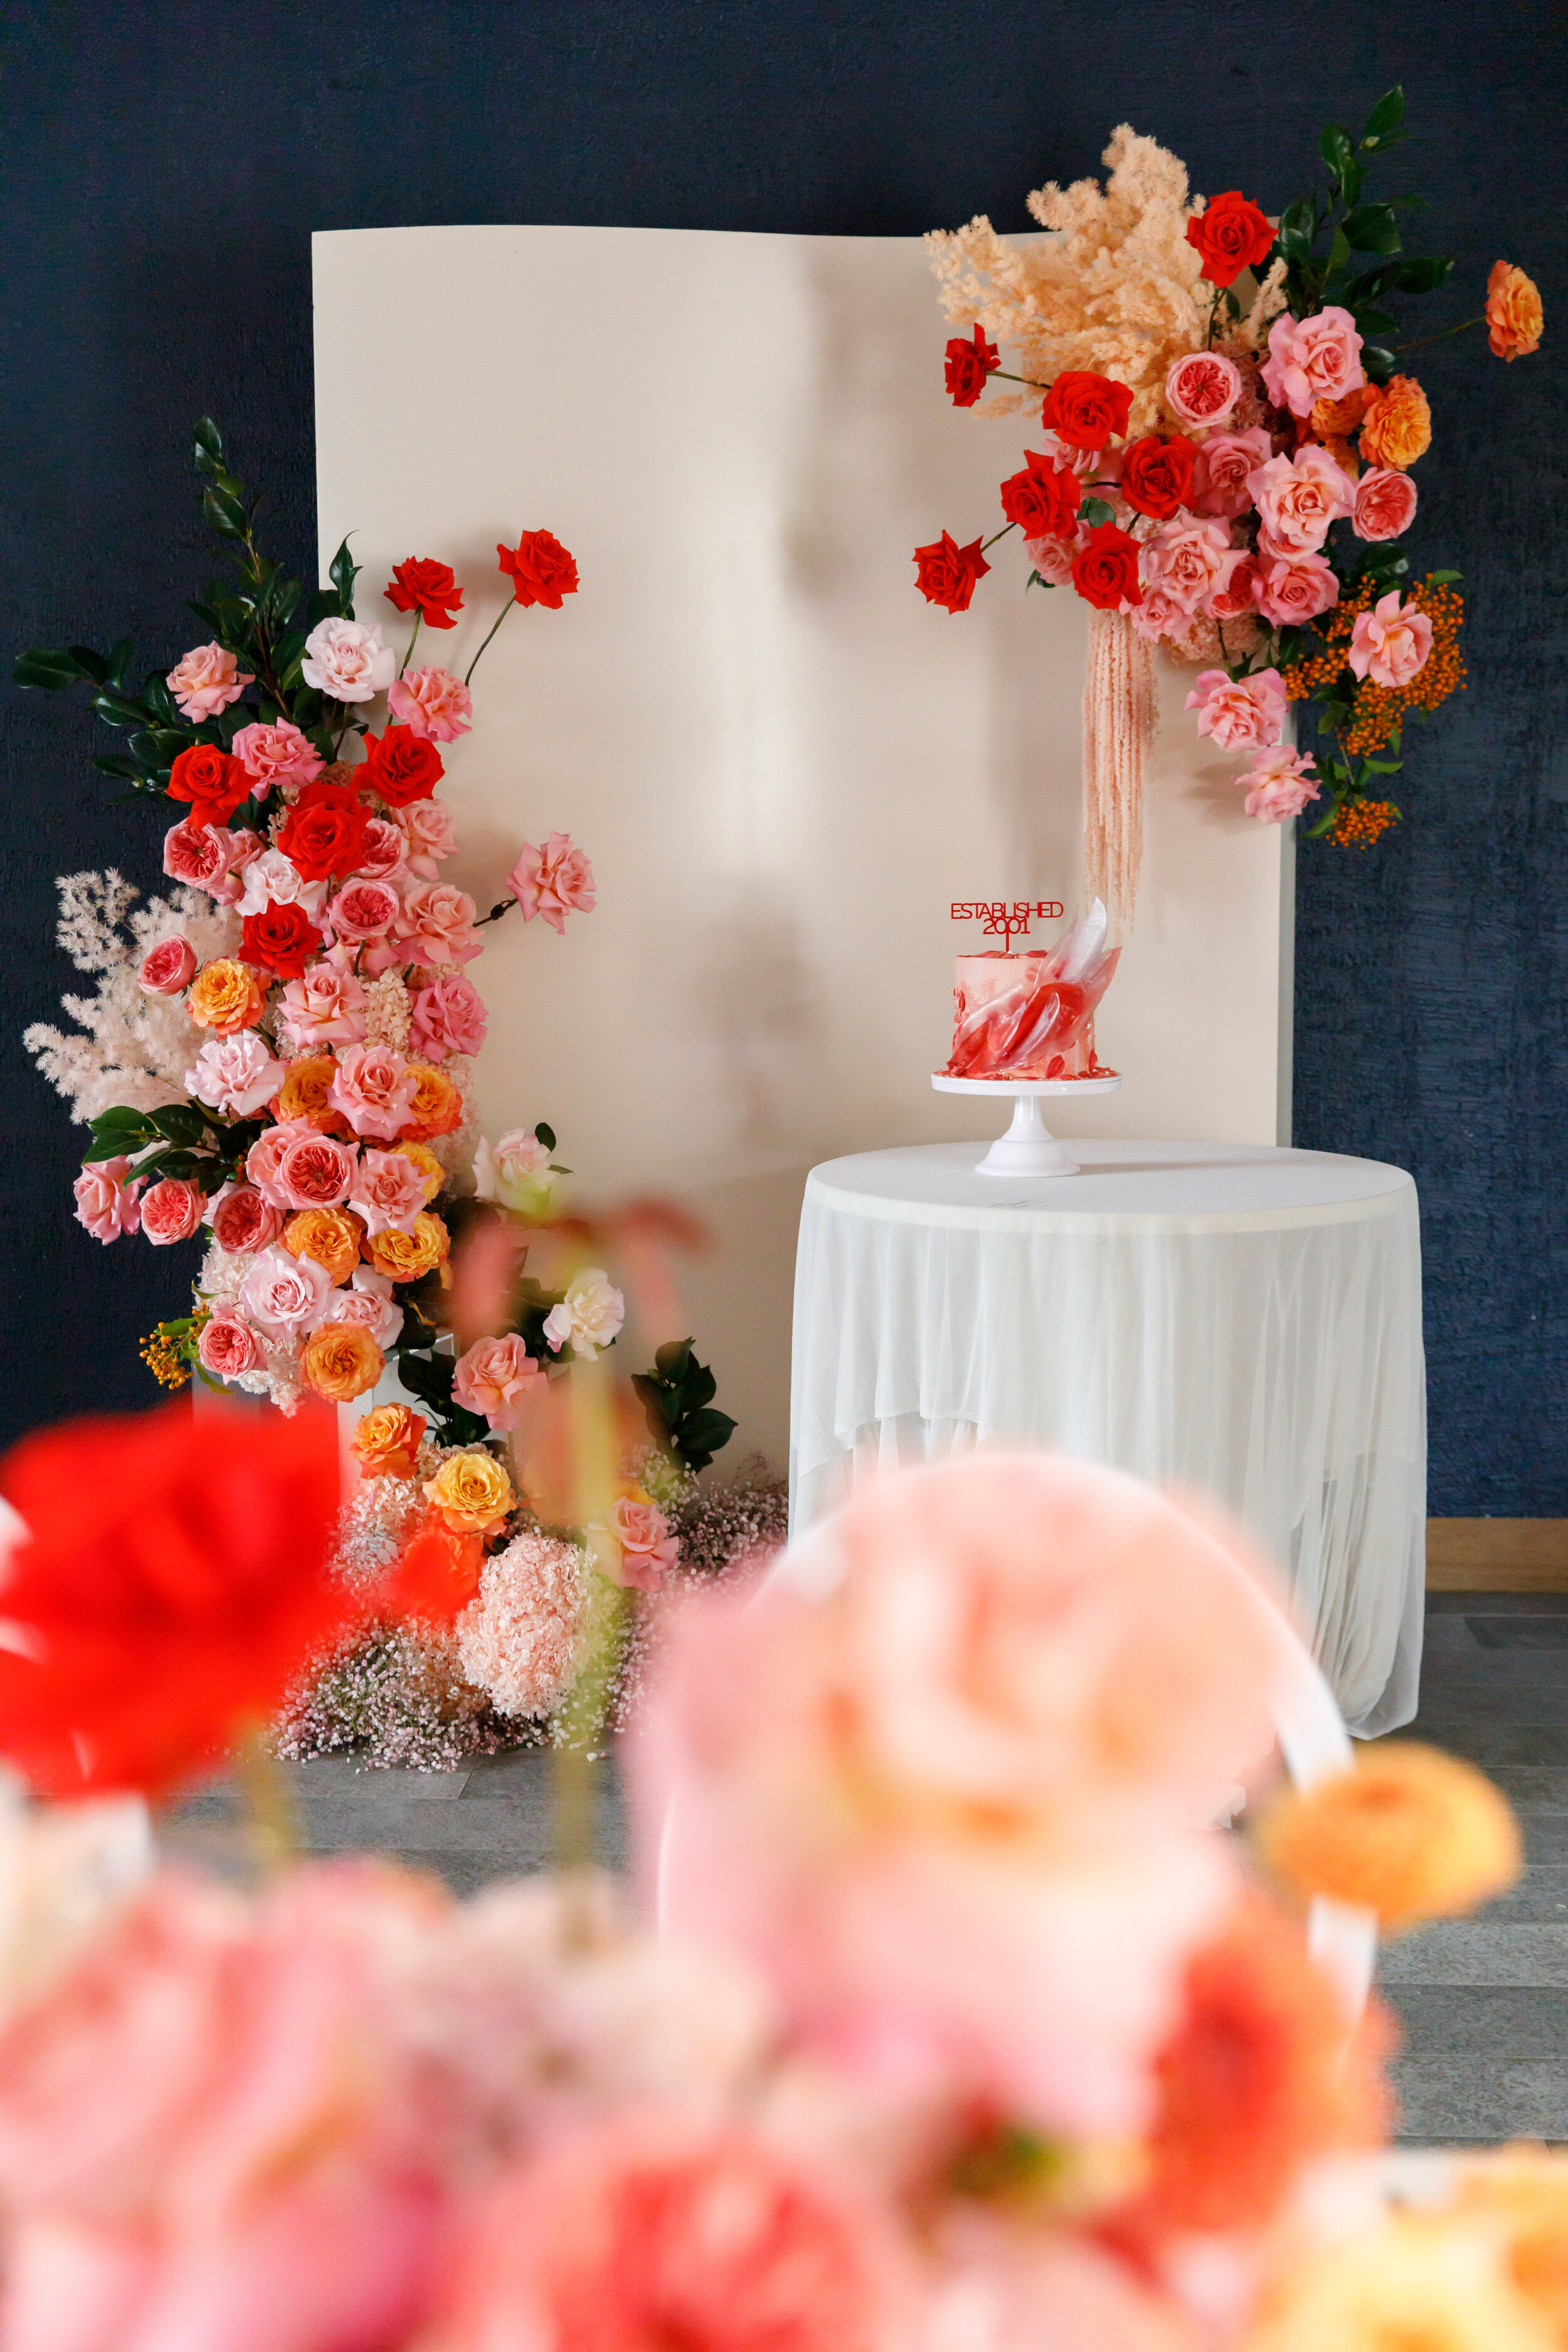 peachy pink  orange and red flowers  styling backdrop events florist sydney